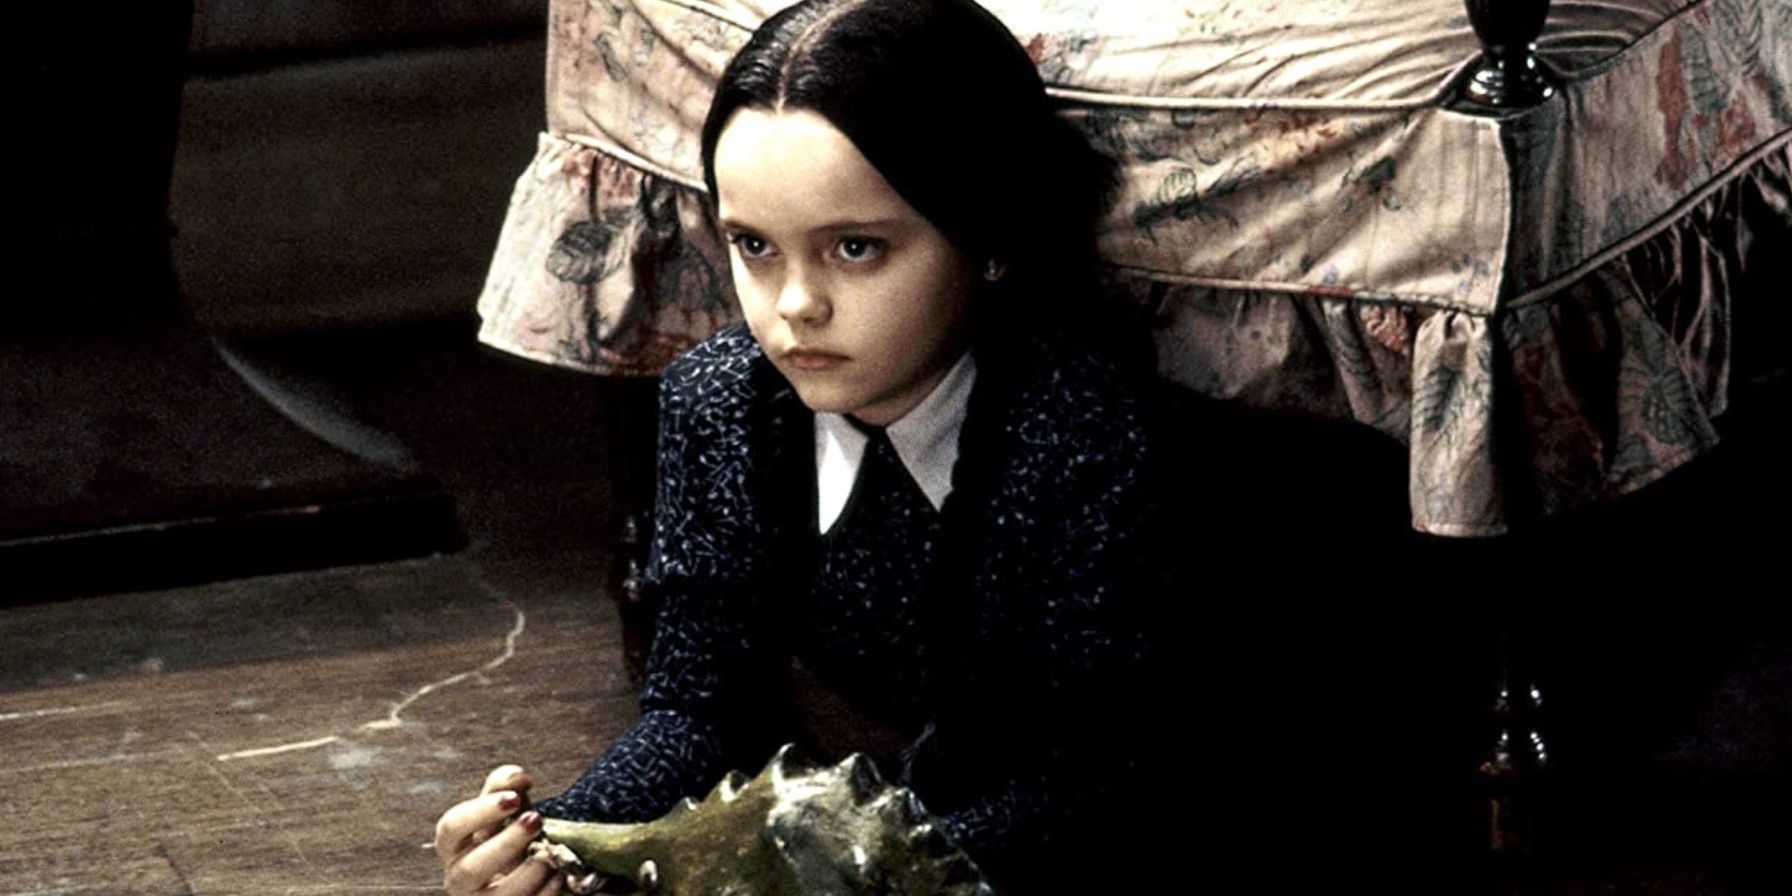 Christina Ricci as Wednesday Addams with a dinosaur toy in the movie 'The Addams Family'